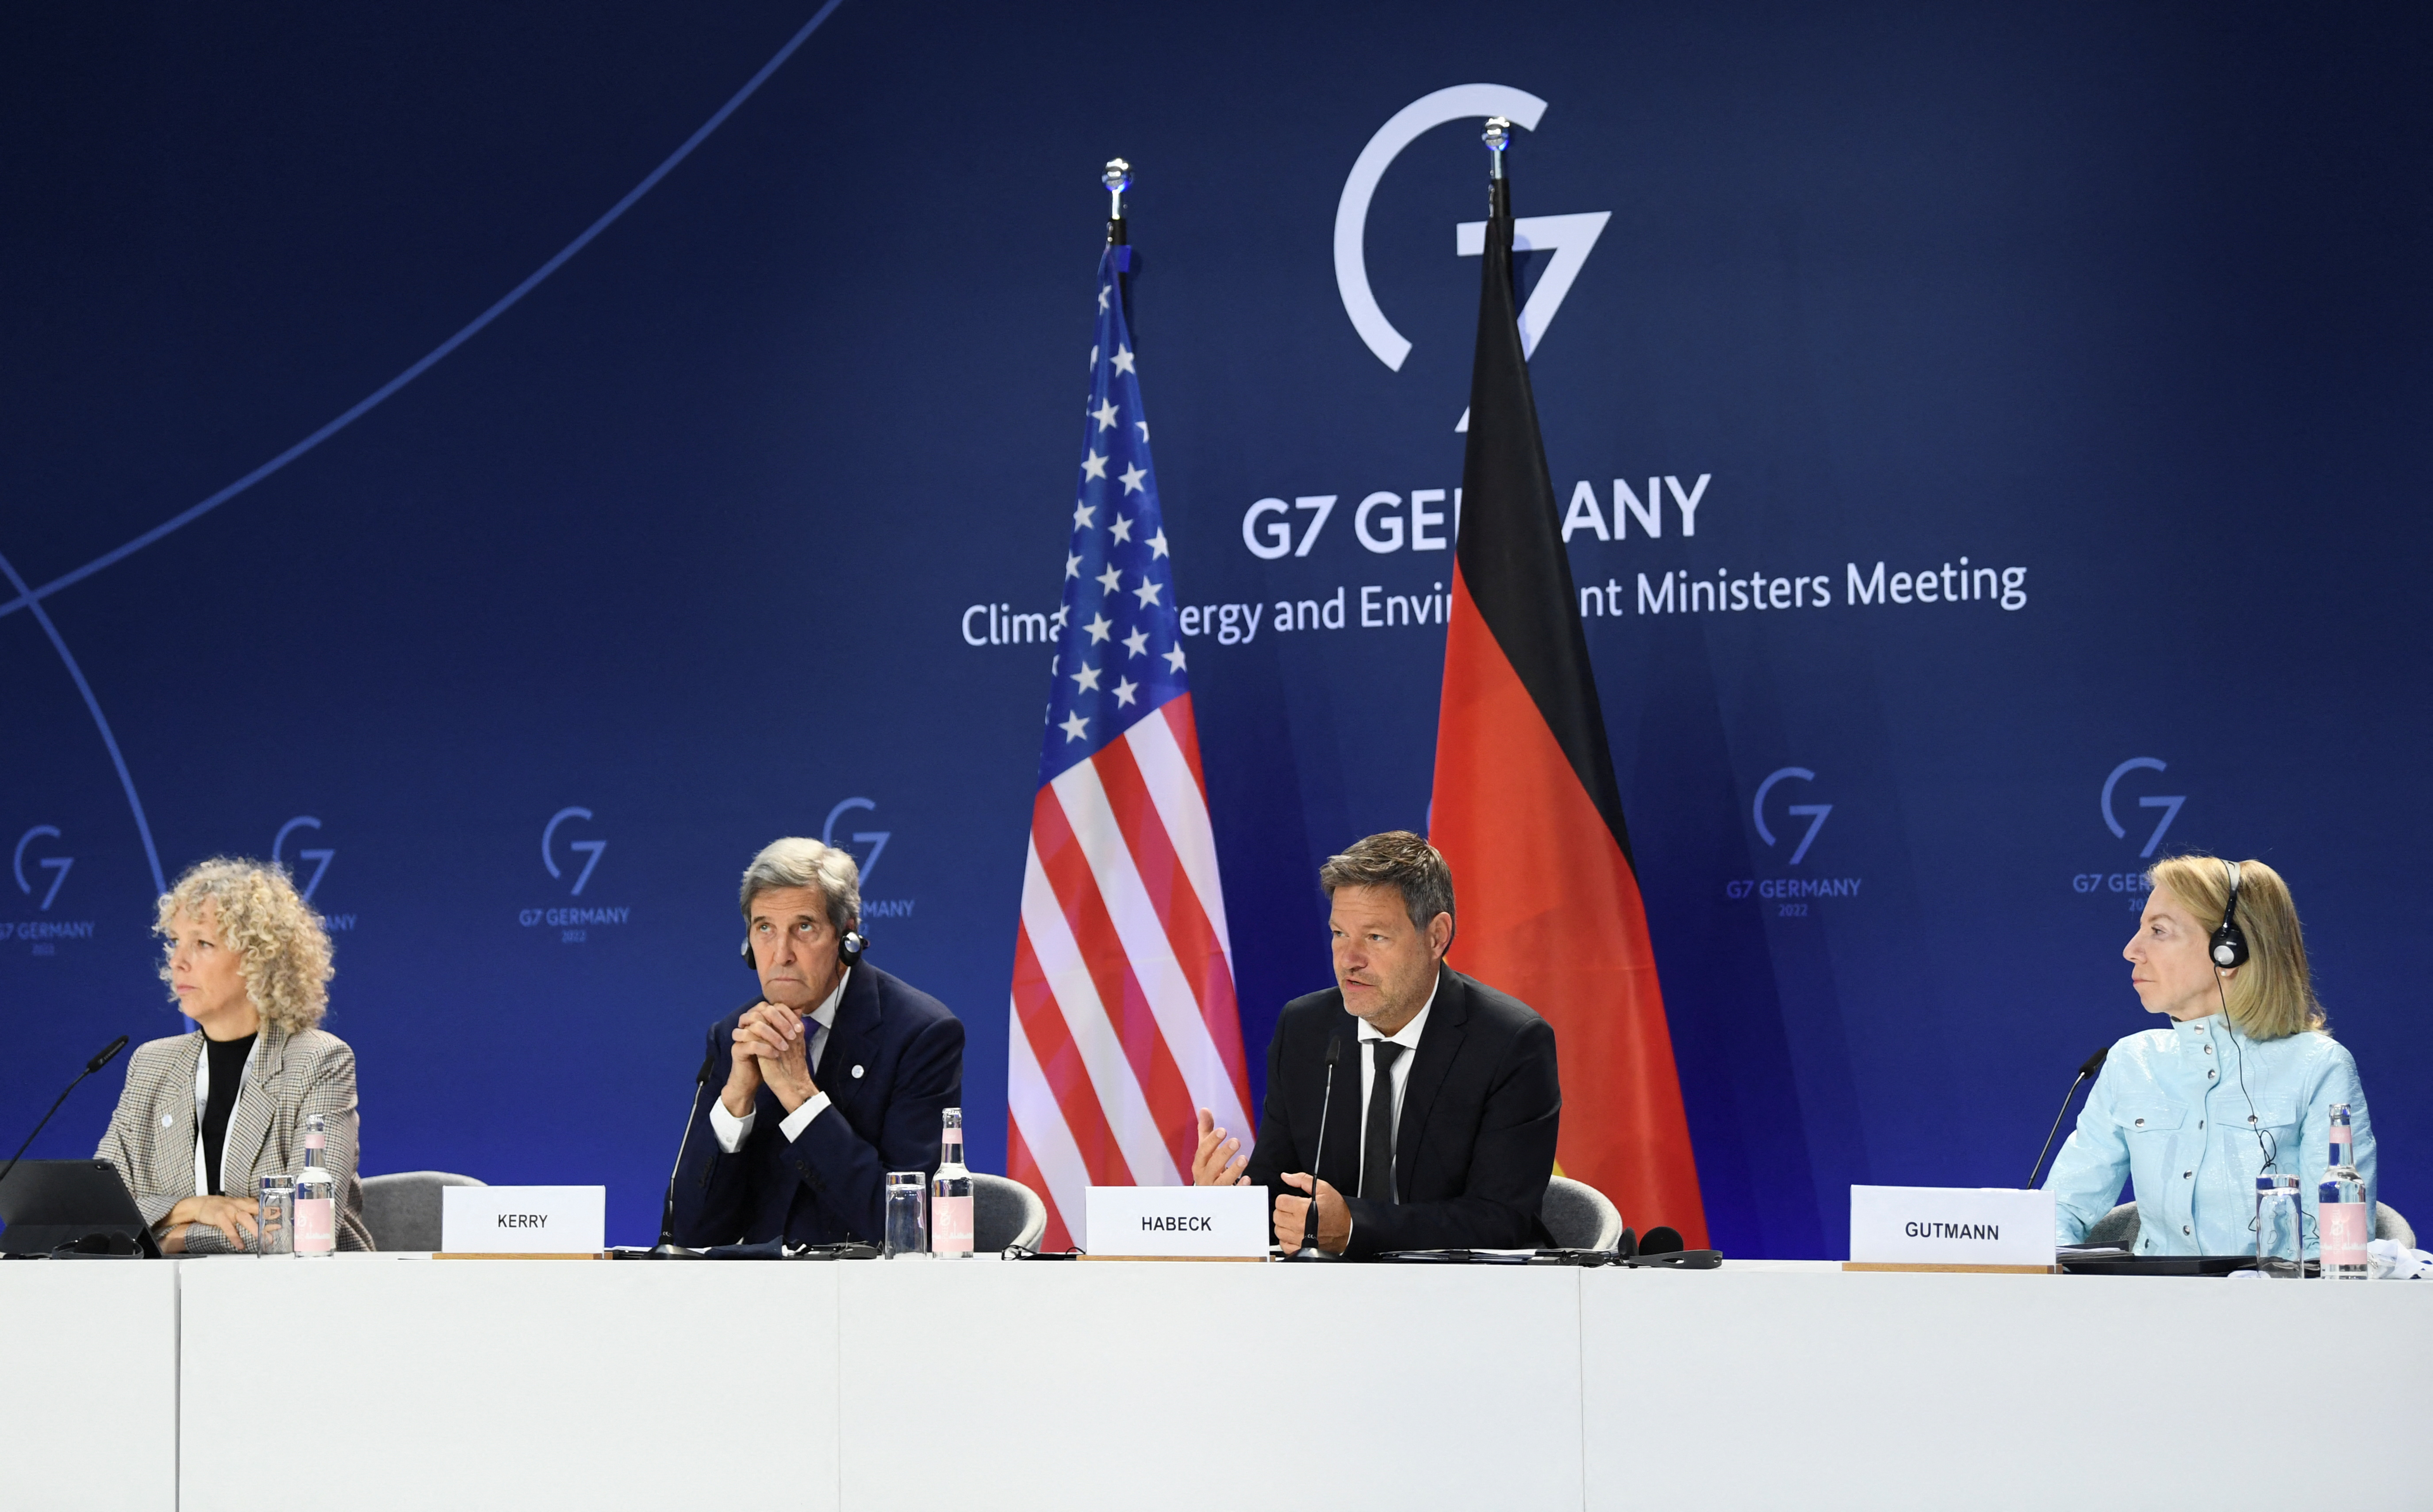 Joint declaration of a German-American climate and energy partnership